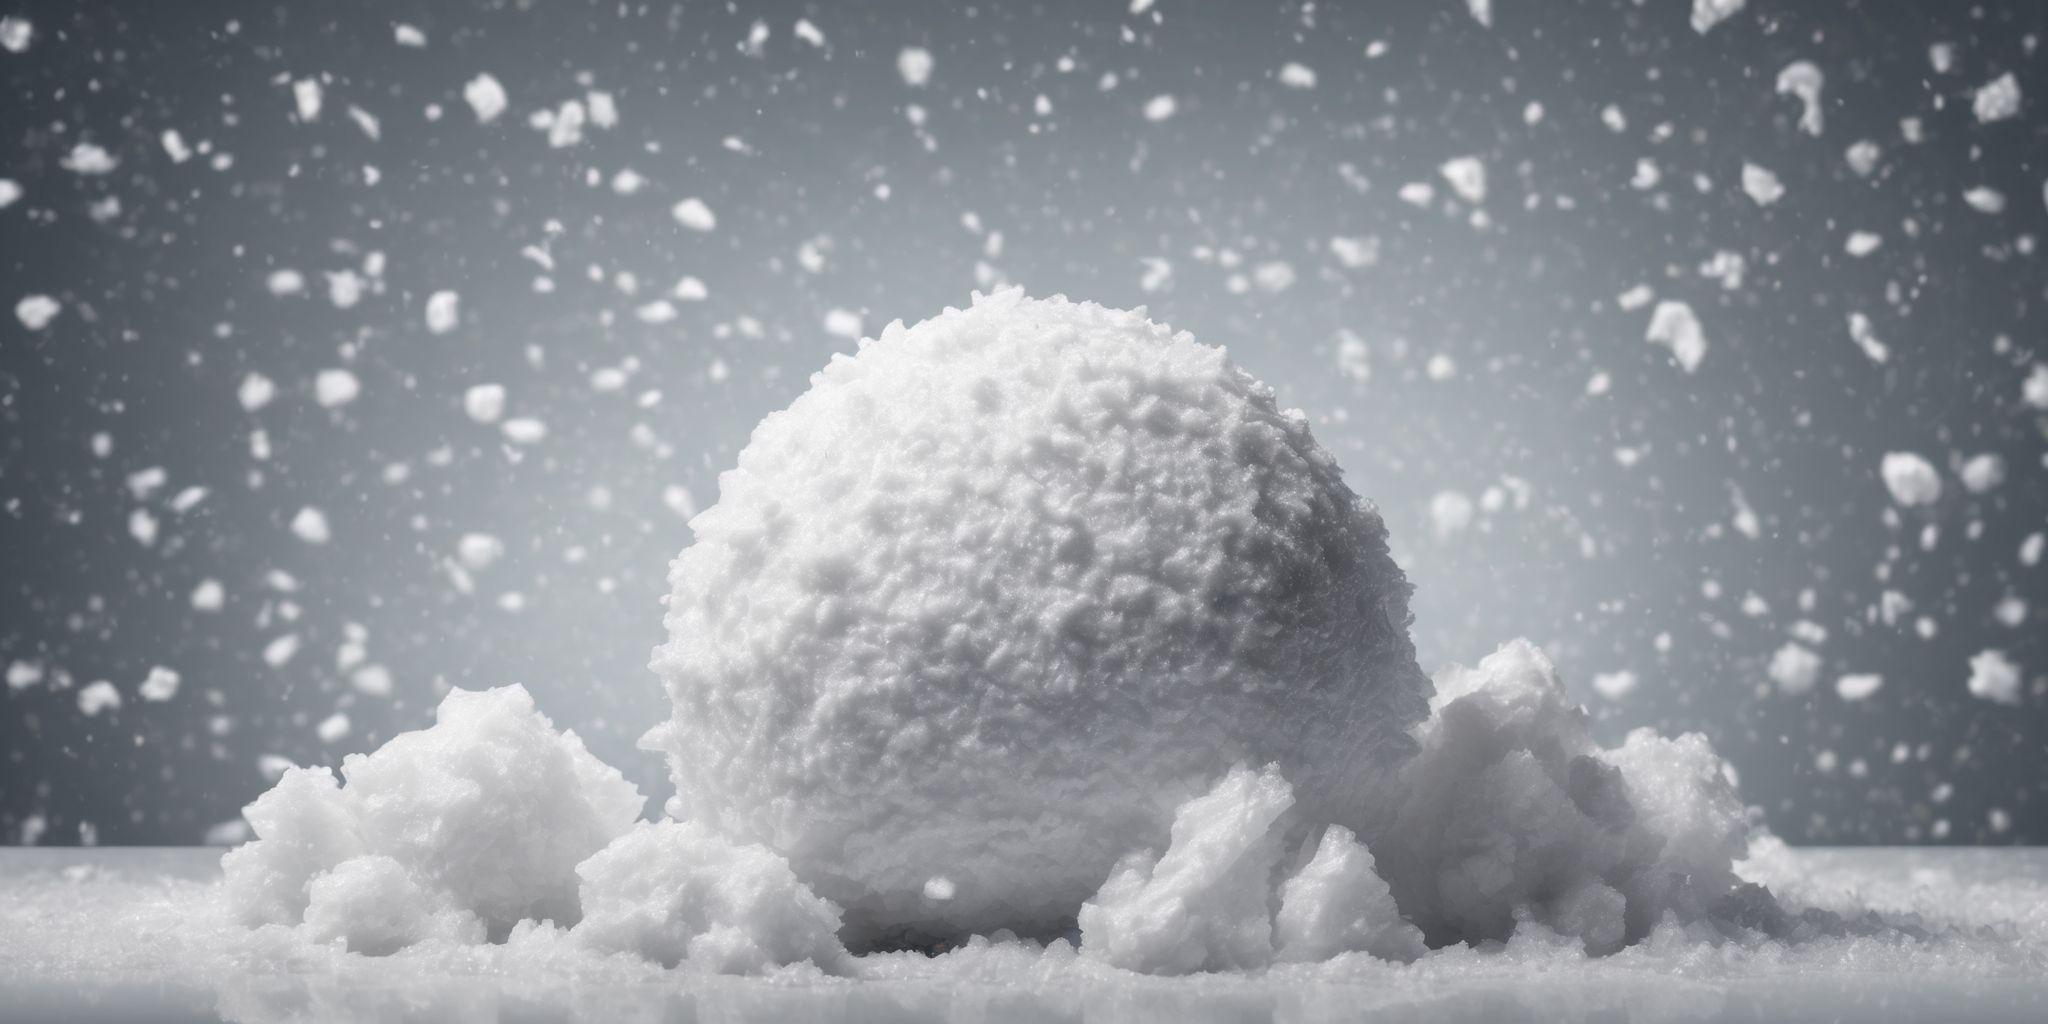 Debt snowball  in realistic, photographic style